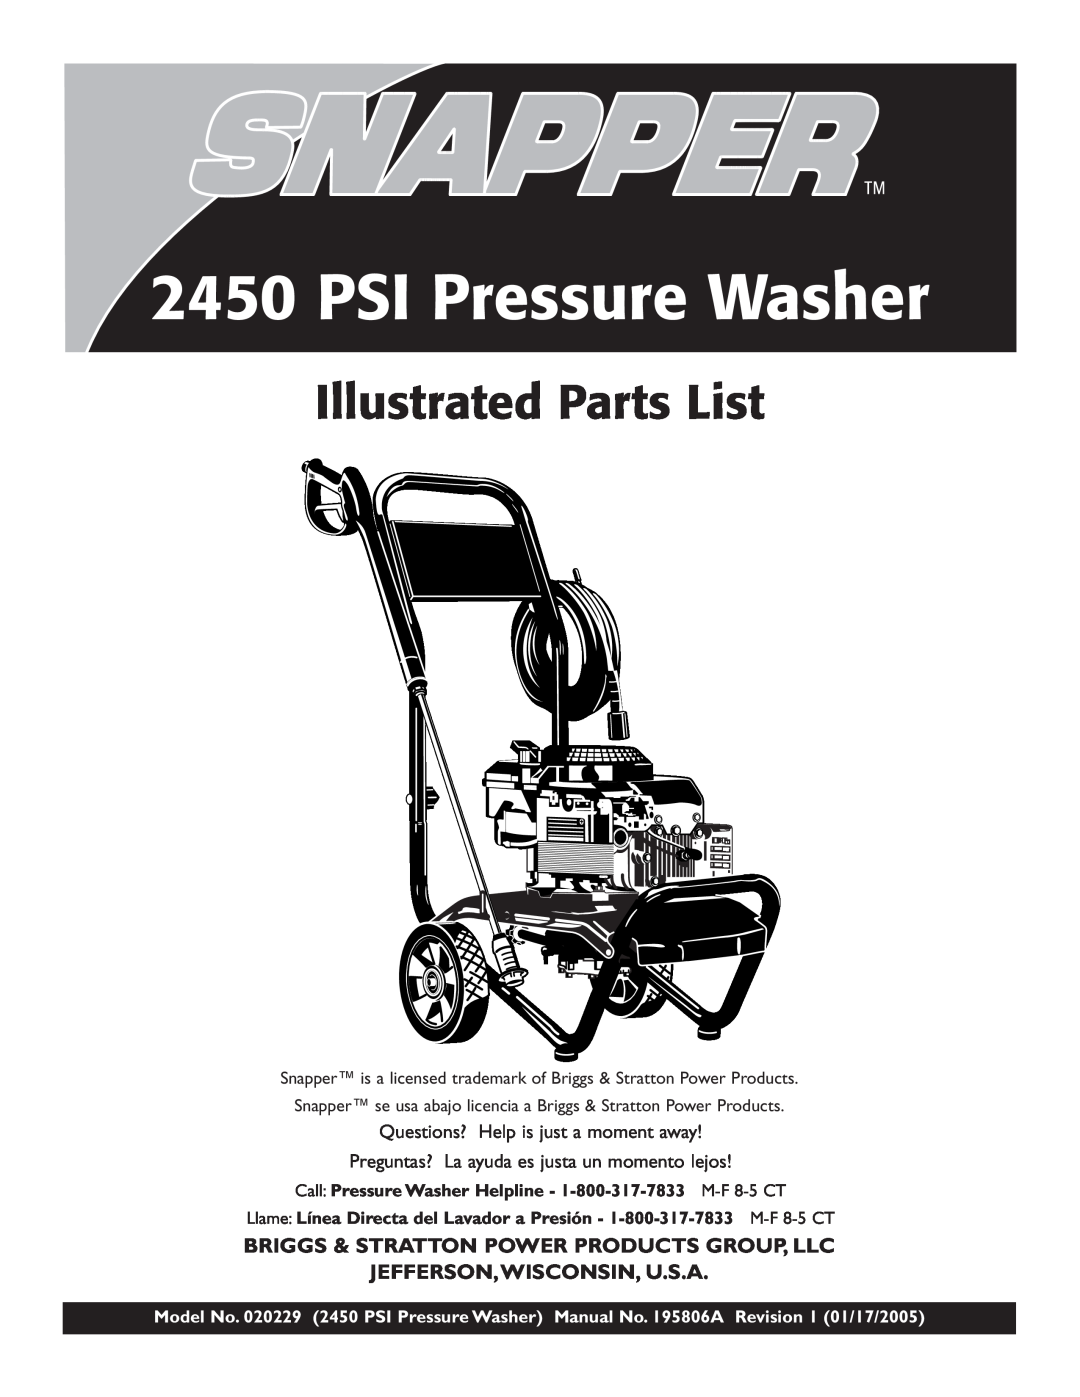 Snapper 20229 manual PSI Pressure Washer, Illustrated Parts List, Briggs & Stratton Power Products Group, Llc 